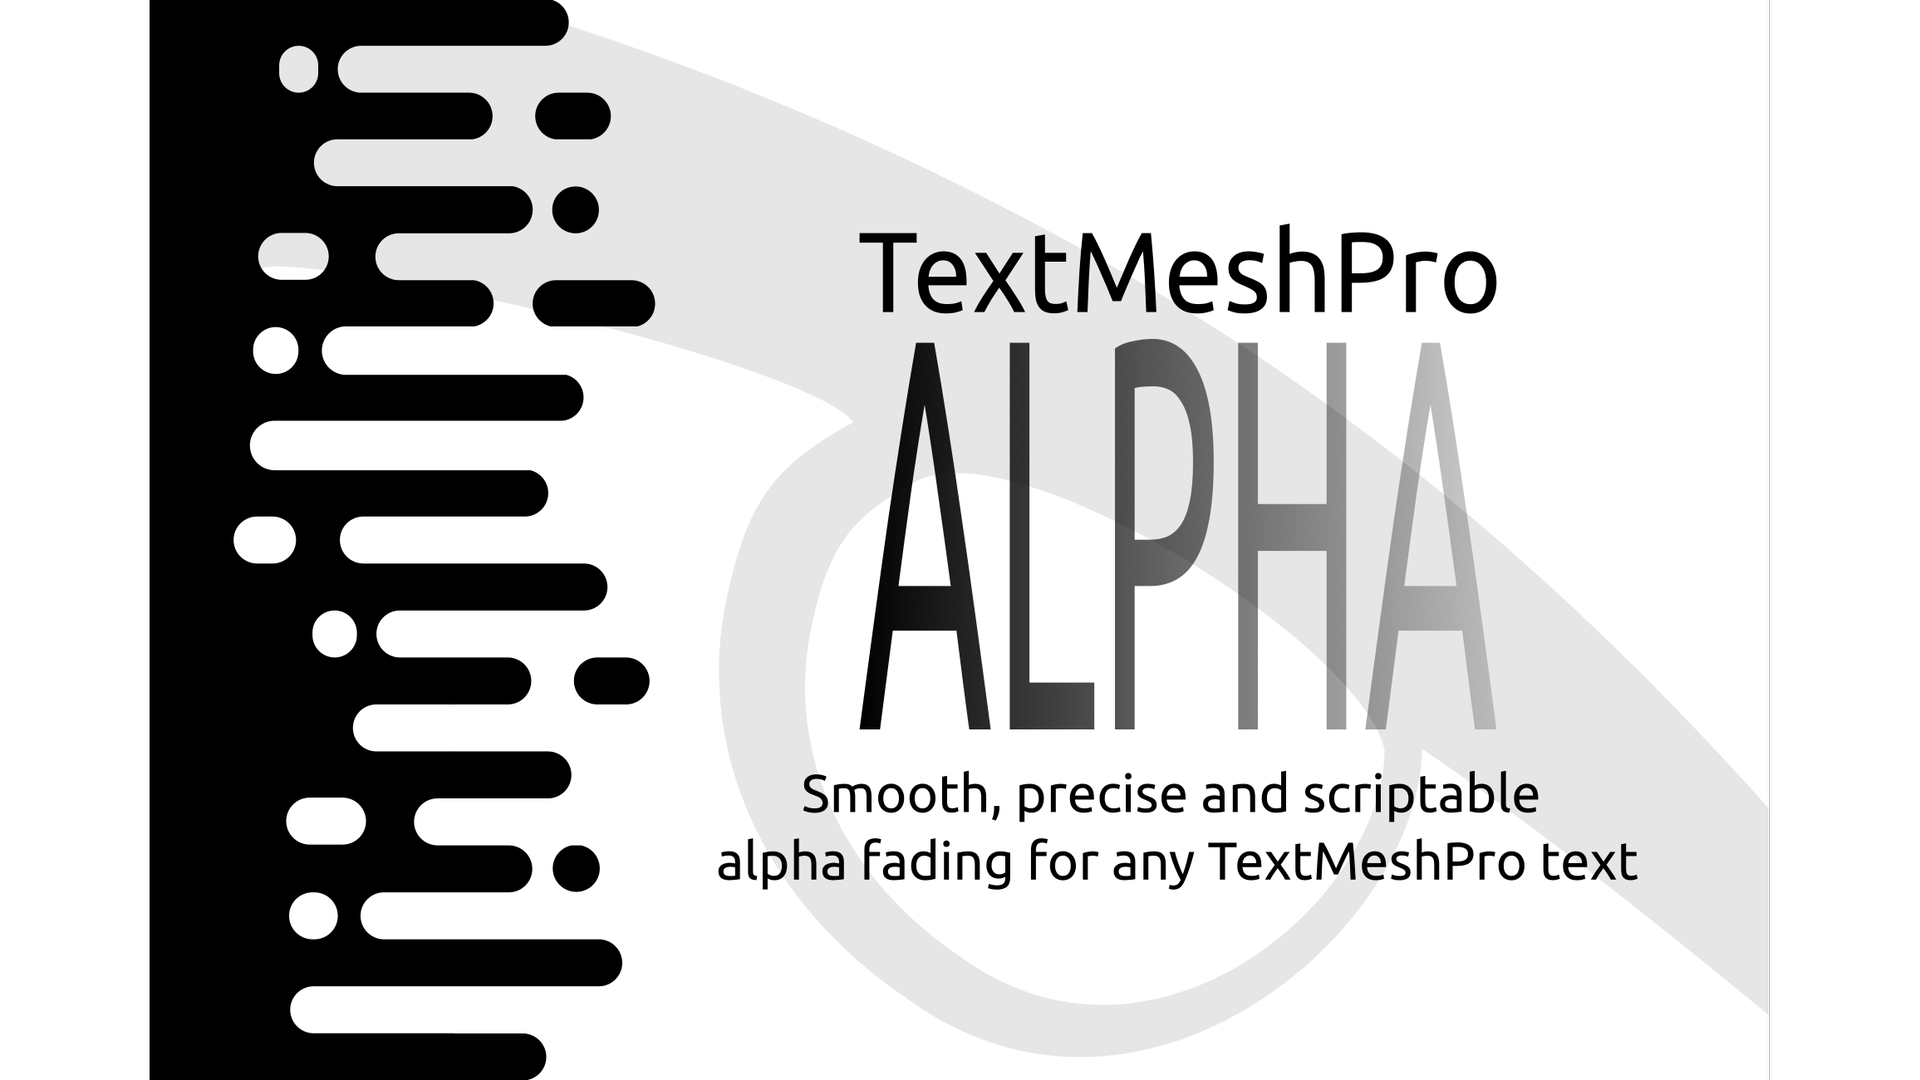 Promotional card for the "TextMeshPro Alpha" Unity asset